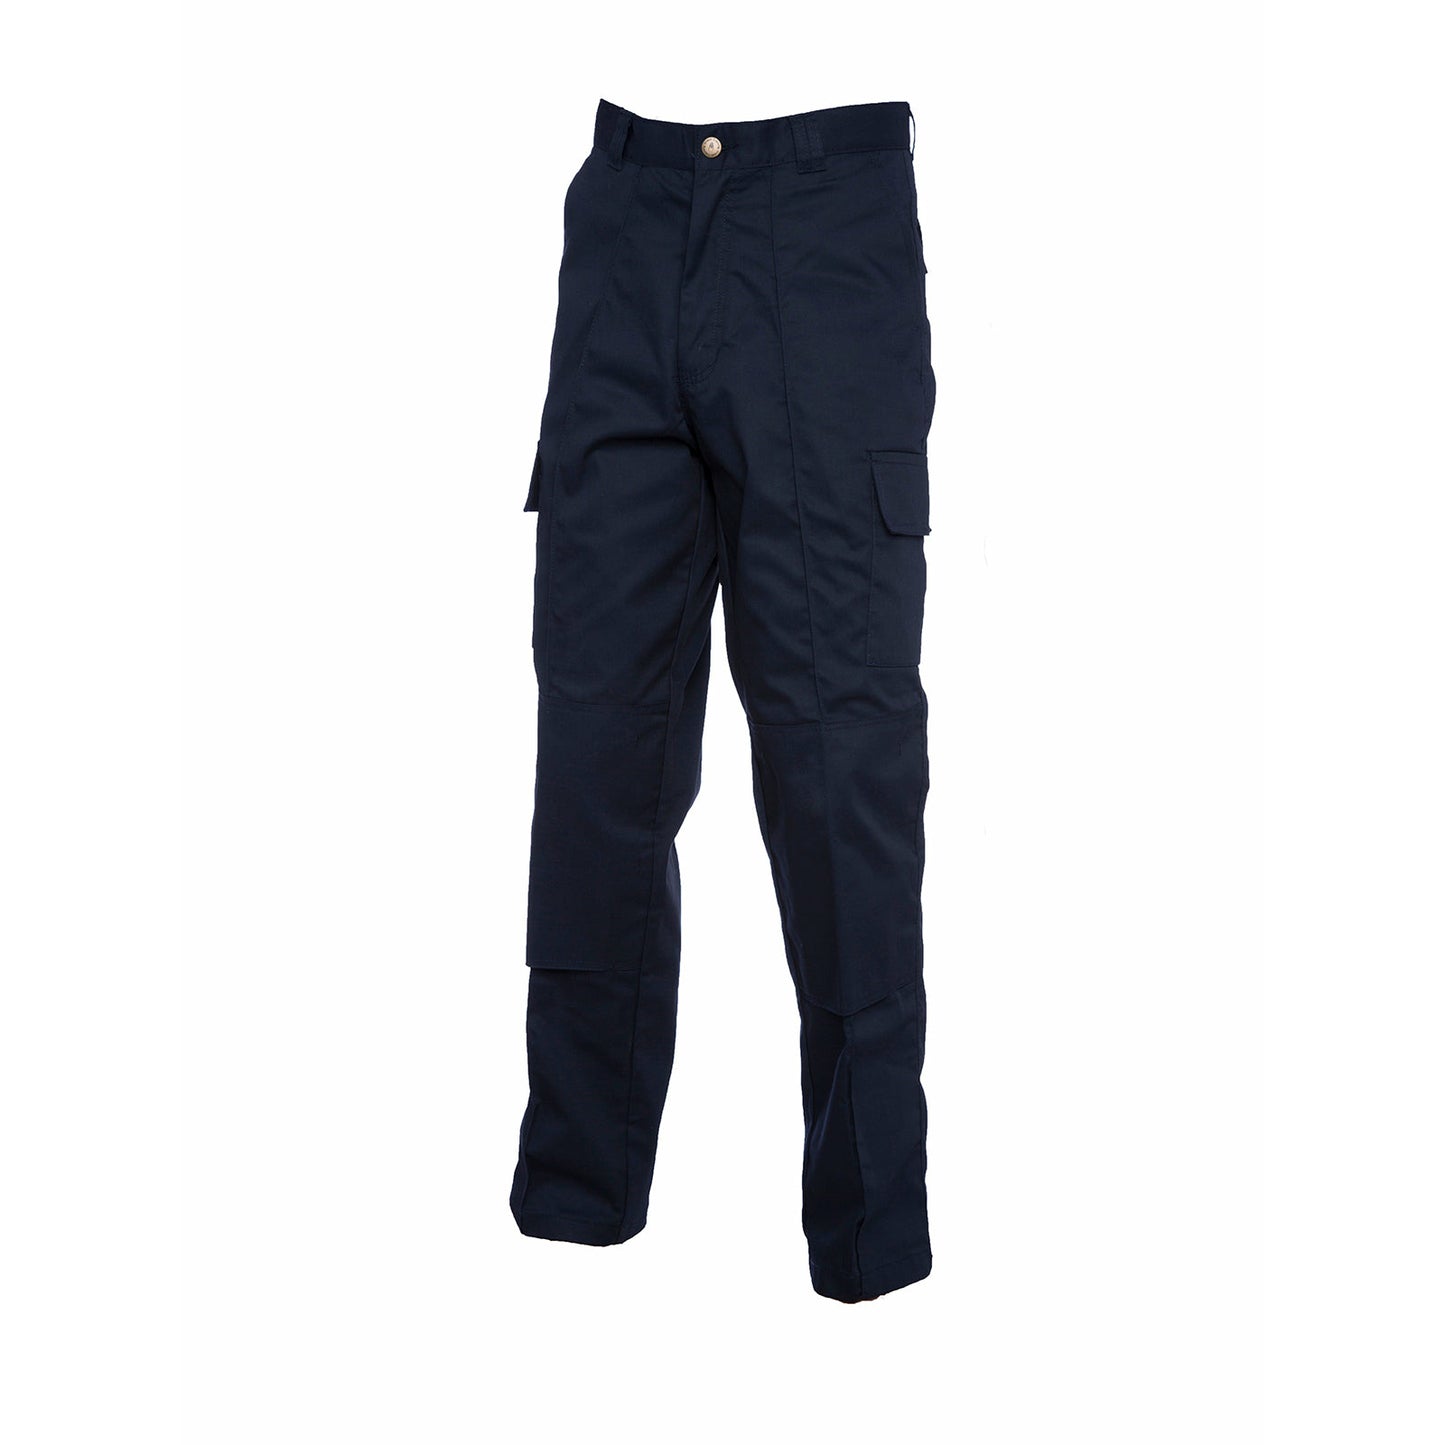 Cargo Trousers with Knee Pad Pockets Long Navy